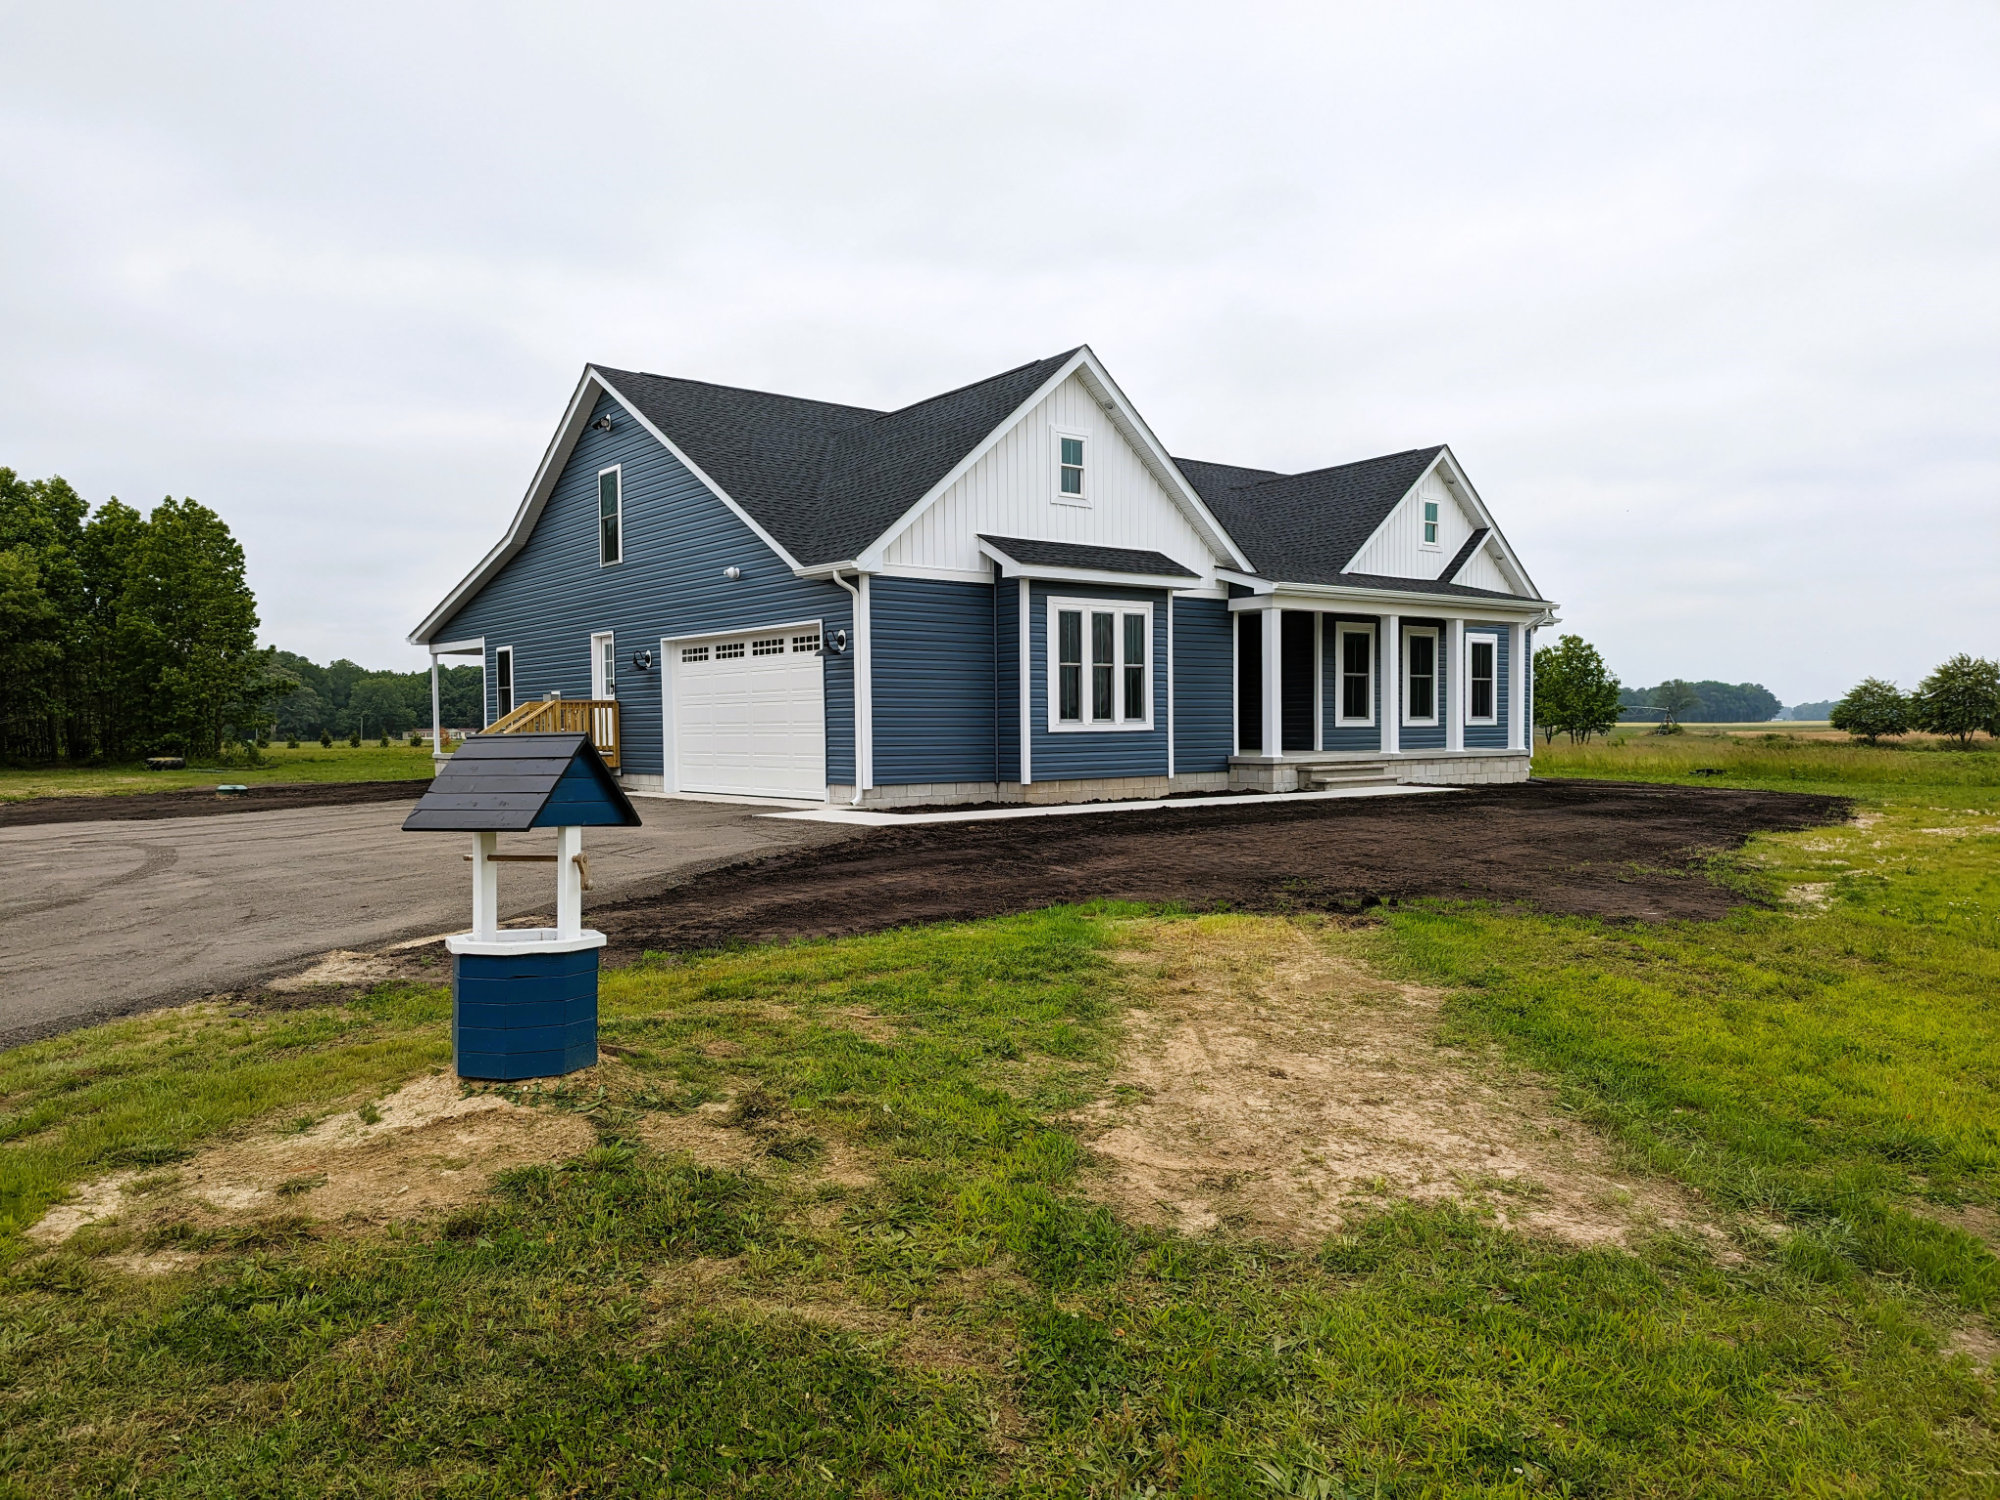 The Willow – Popular Sussex County Home Design